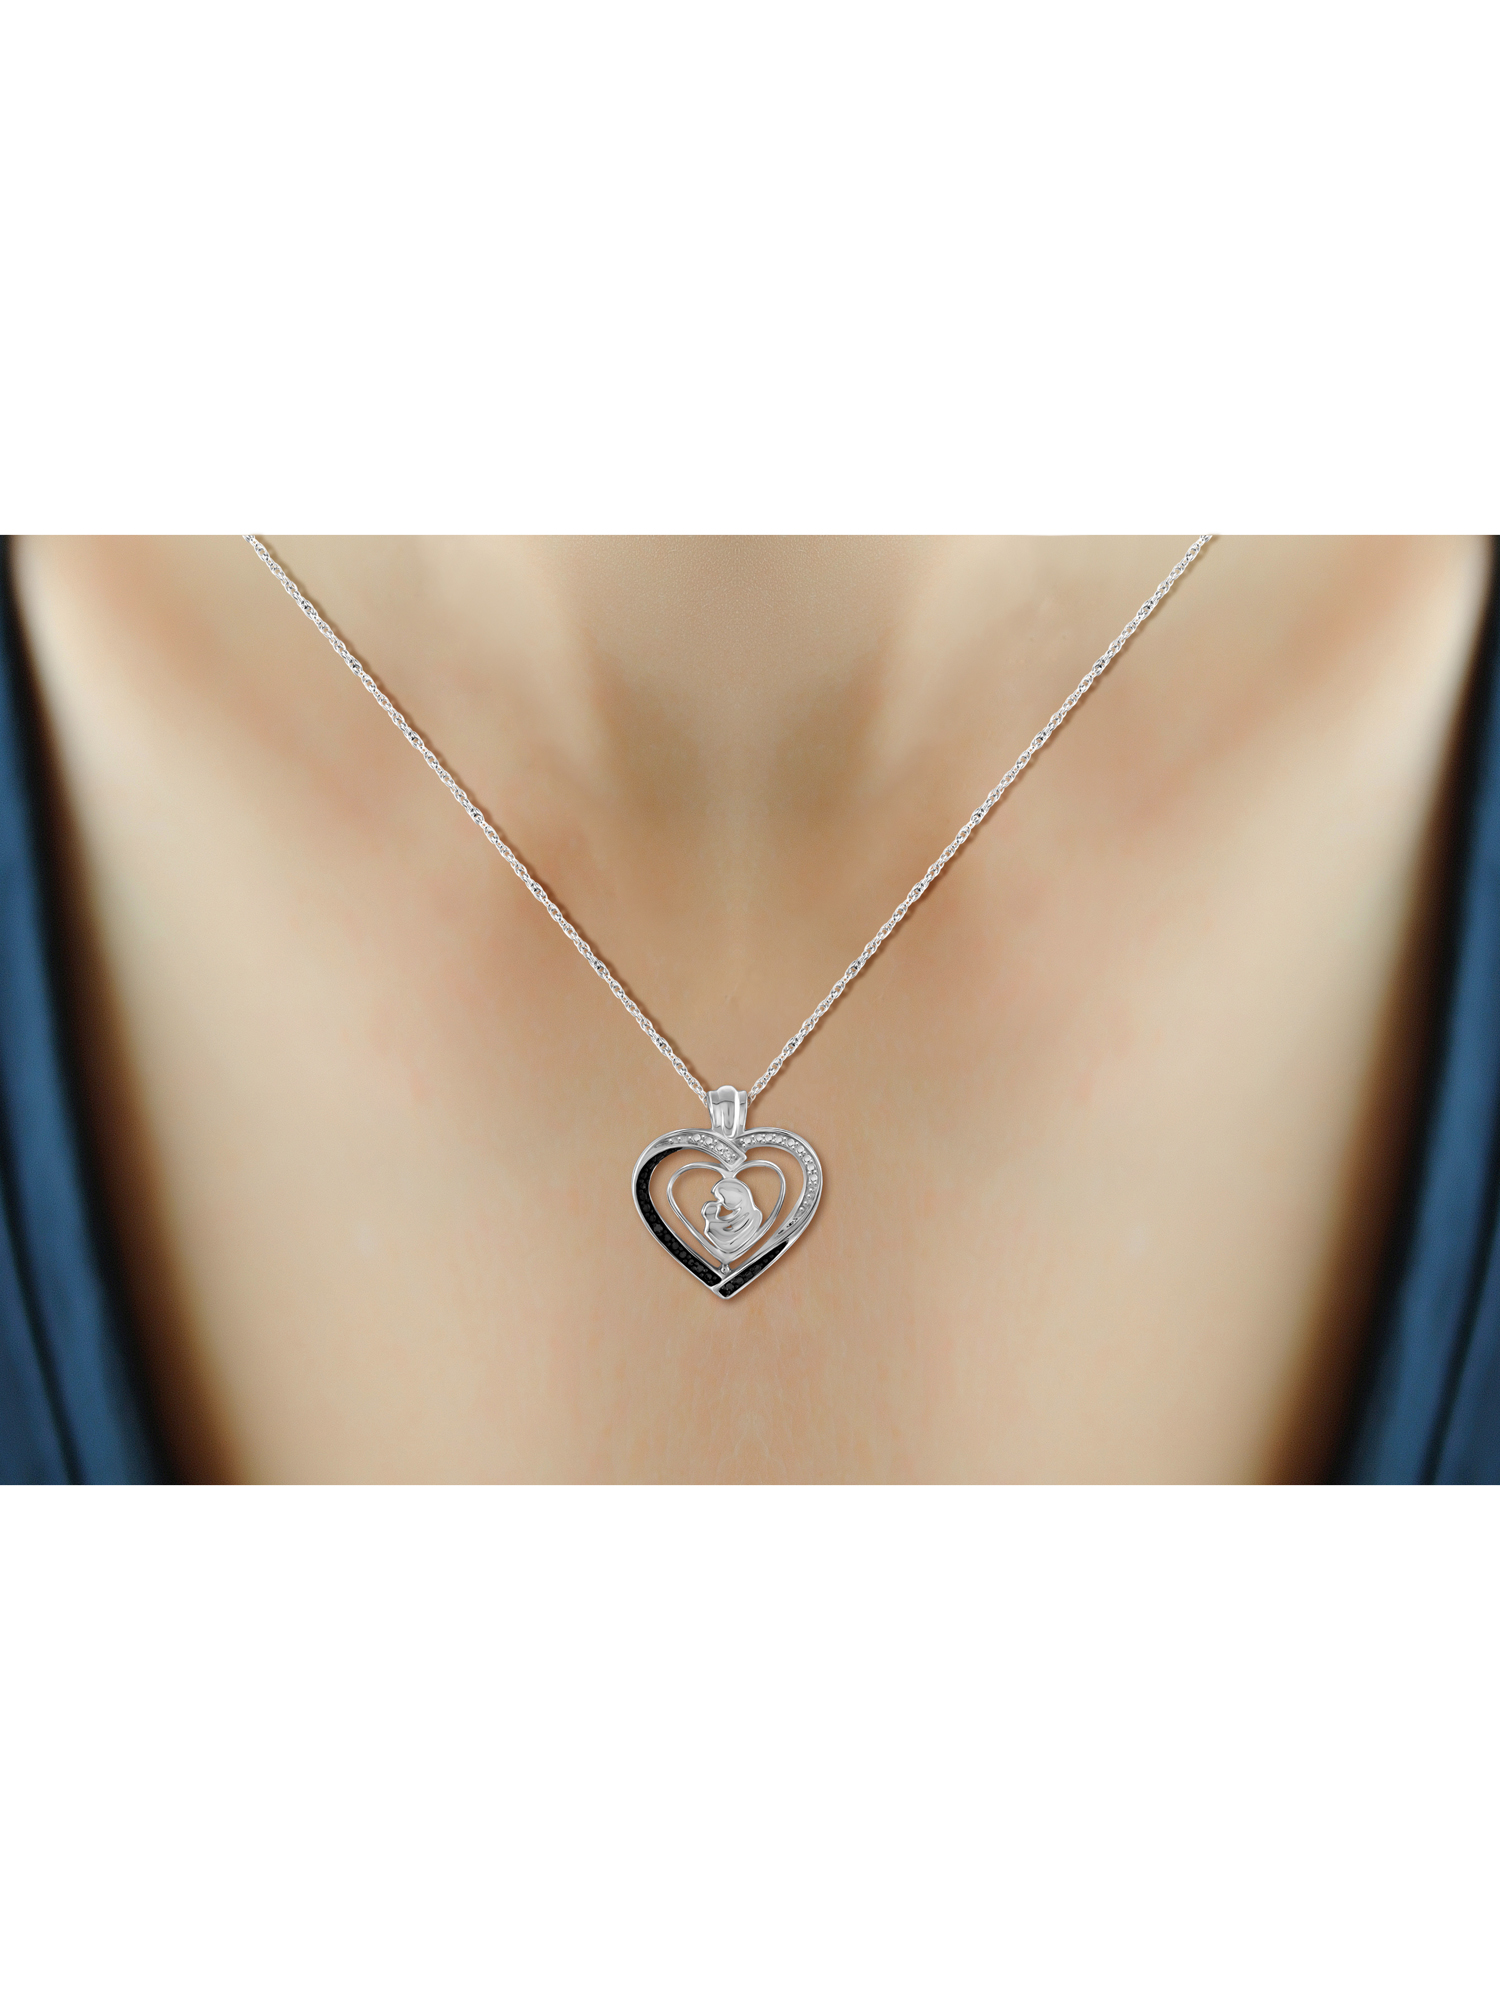 JewelersClub Mom Necklace 0.925 Sterling Silver Necklace for Women – Beautiful Accent Black & White Diamonds + 0.925 Sterling Silver Mother Daughter Necklace – Mothers Day Gifts Necklaces for Women - image 4 of 5